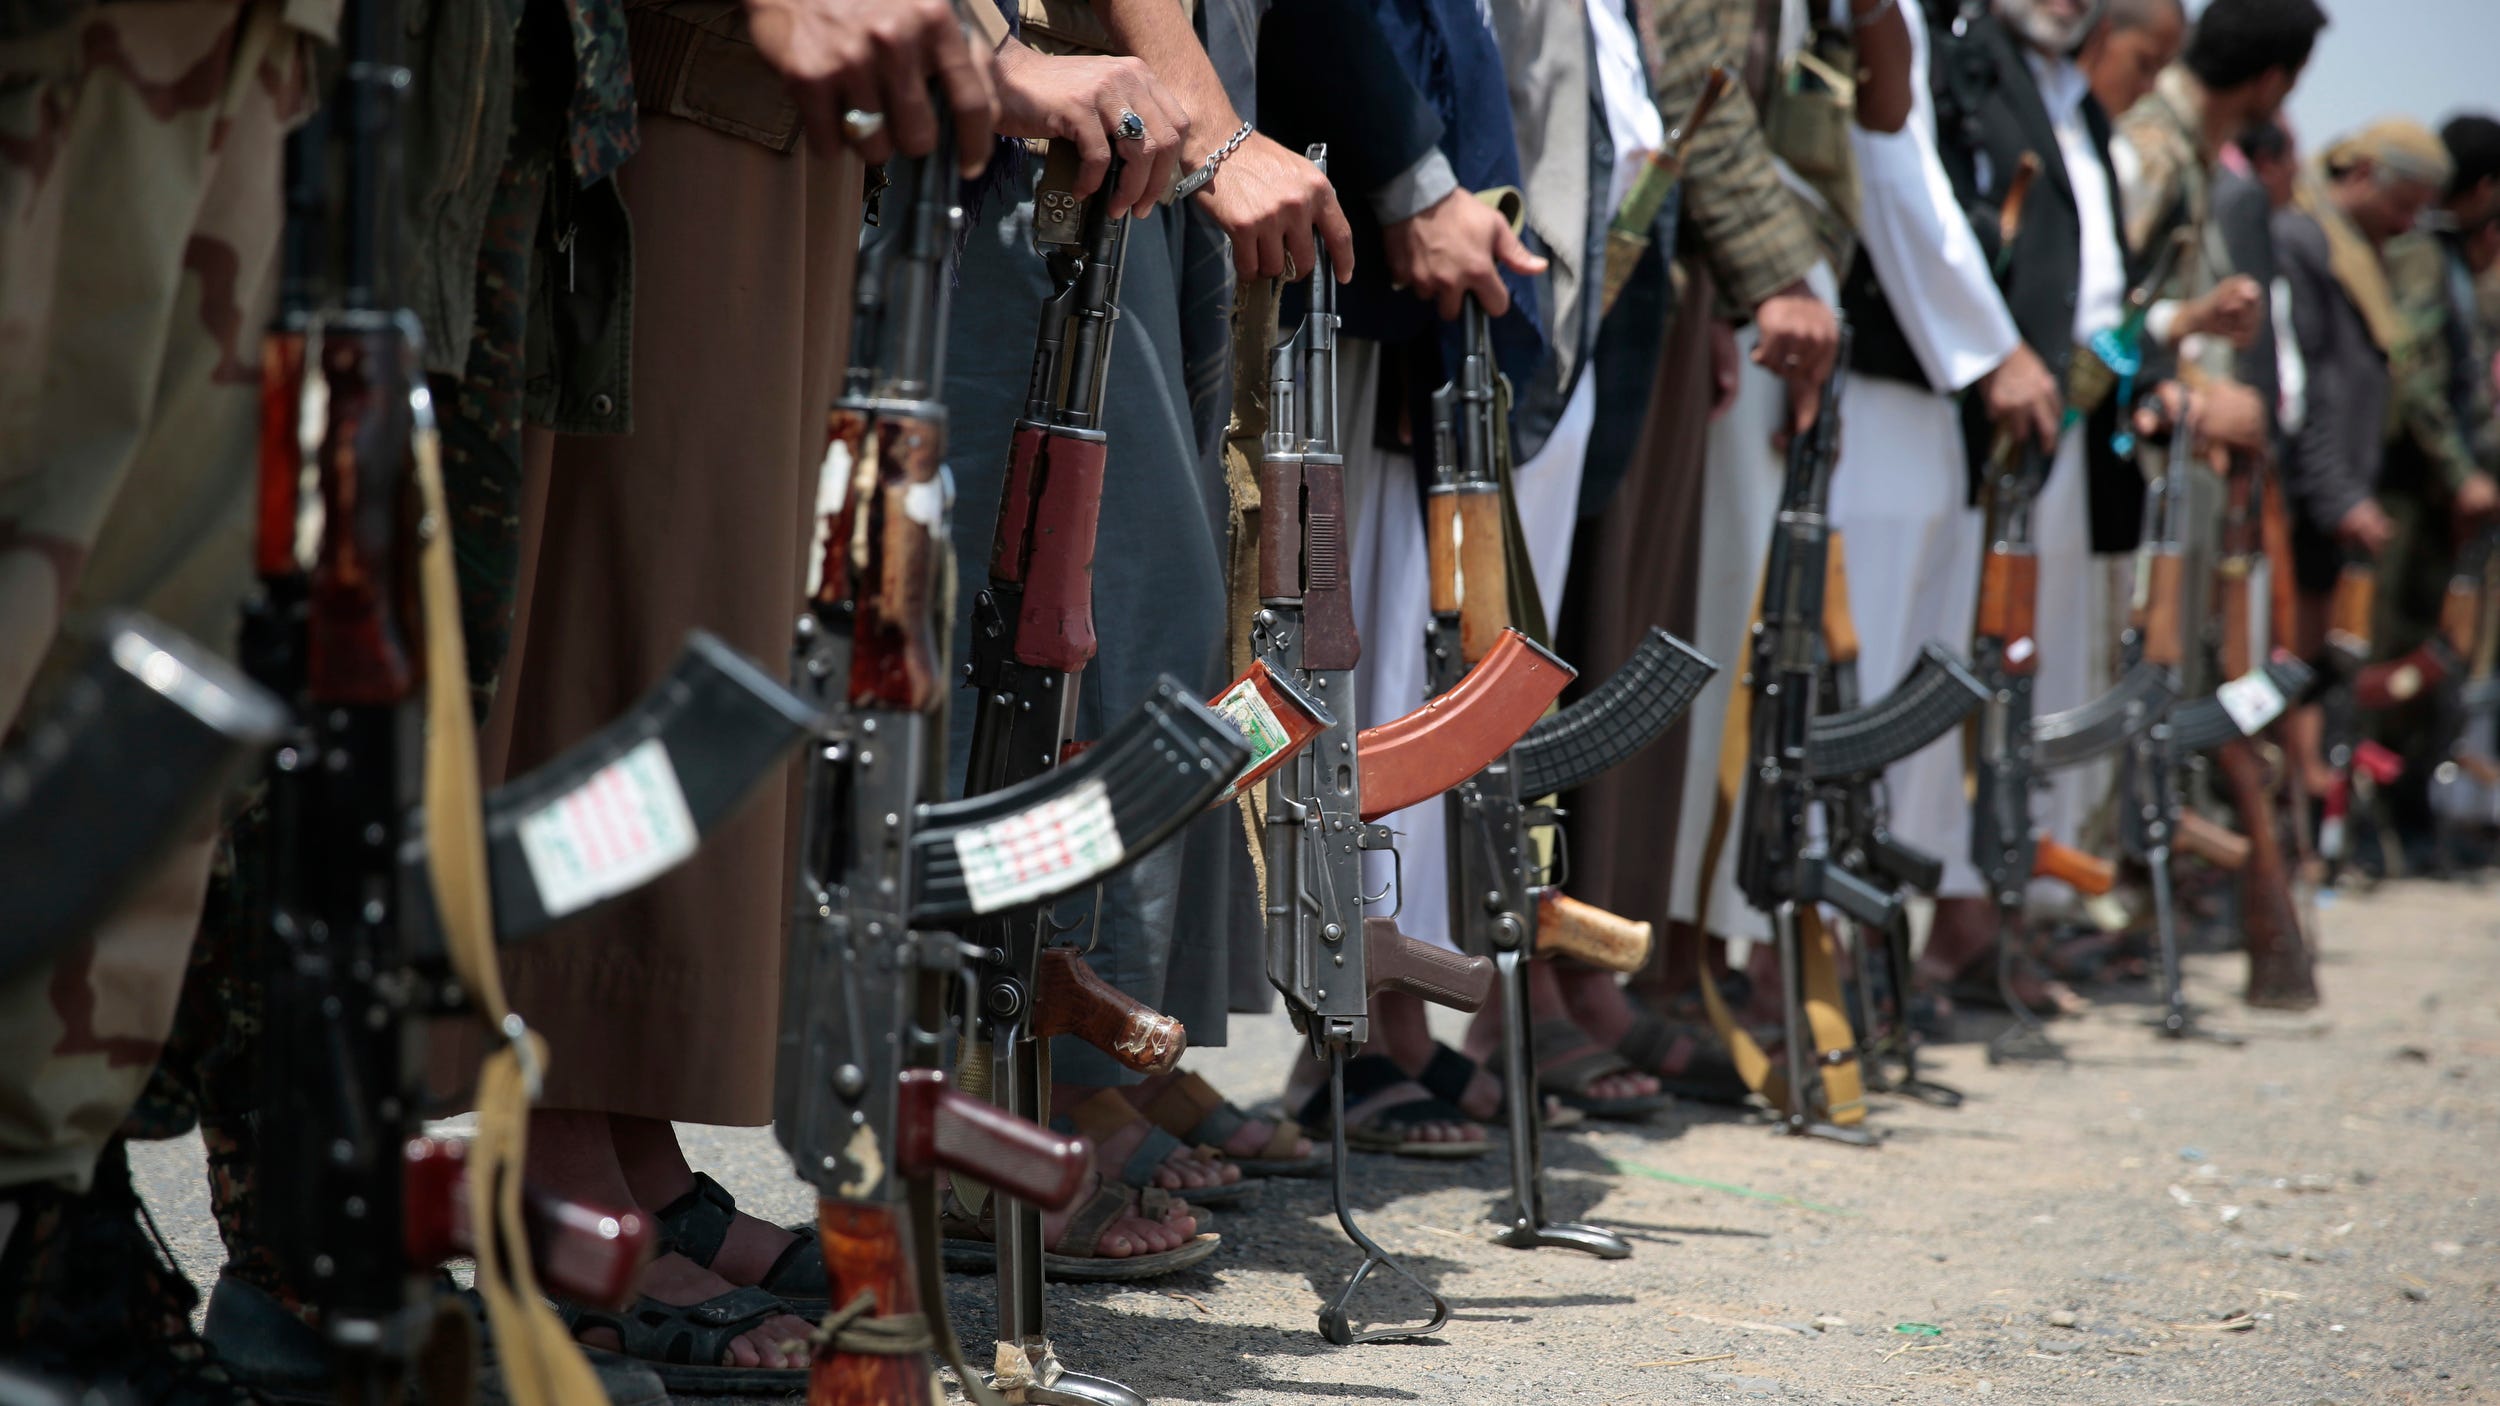 Tribesmen loyal to Houthi rebels hold their weapons during a gathering aimed at mobilizing more fighters into battlefronts in several Yemeni cities, in Sanaa, Yemen, Thursday, Aug. 11, 2016.